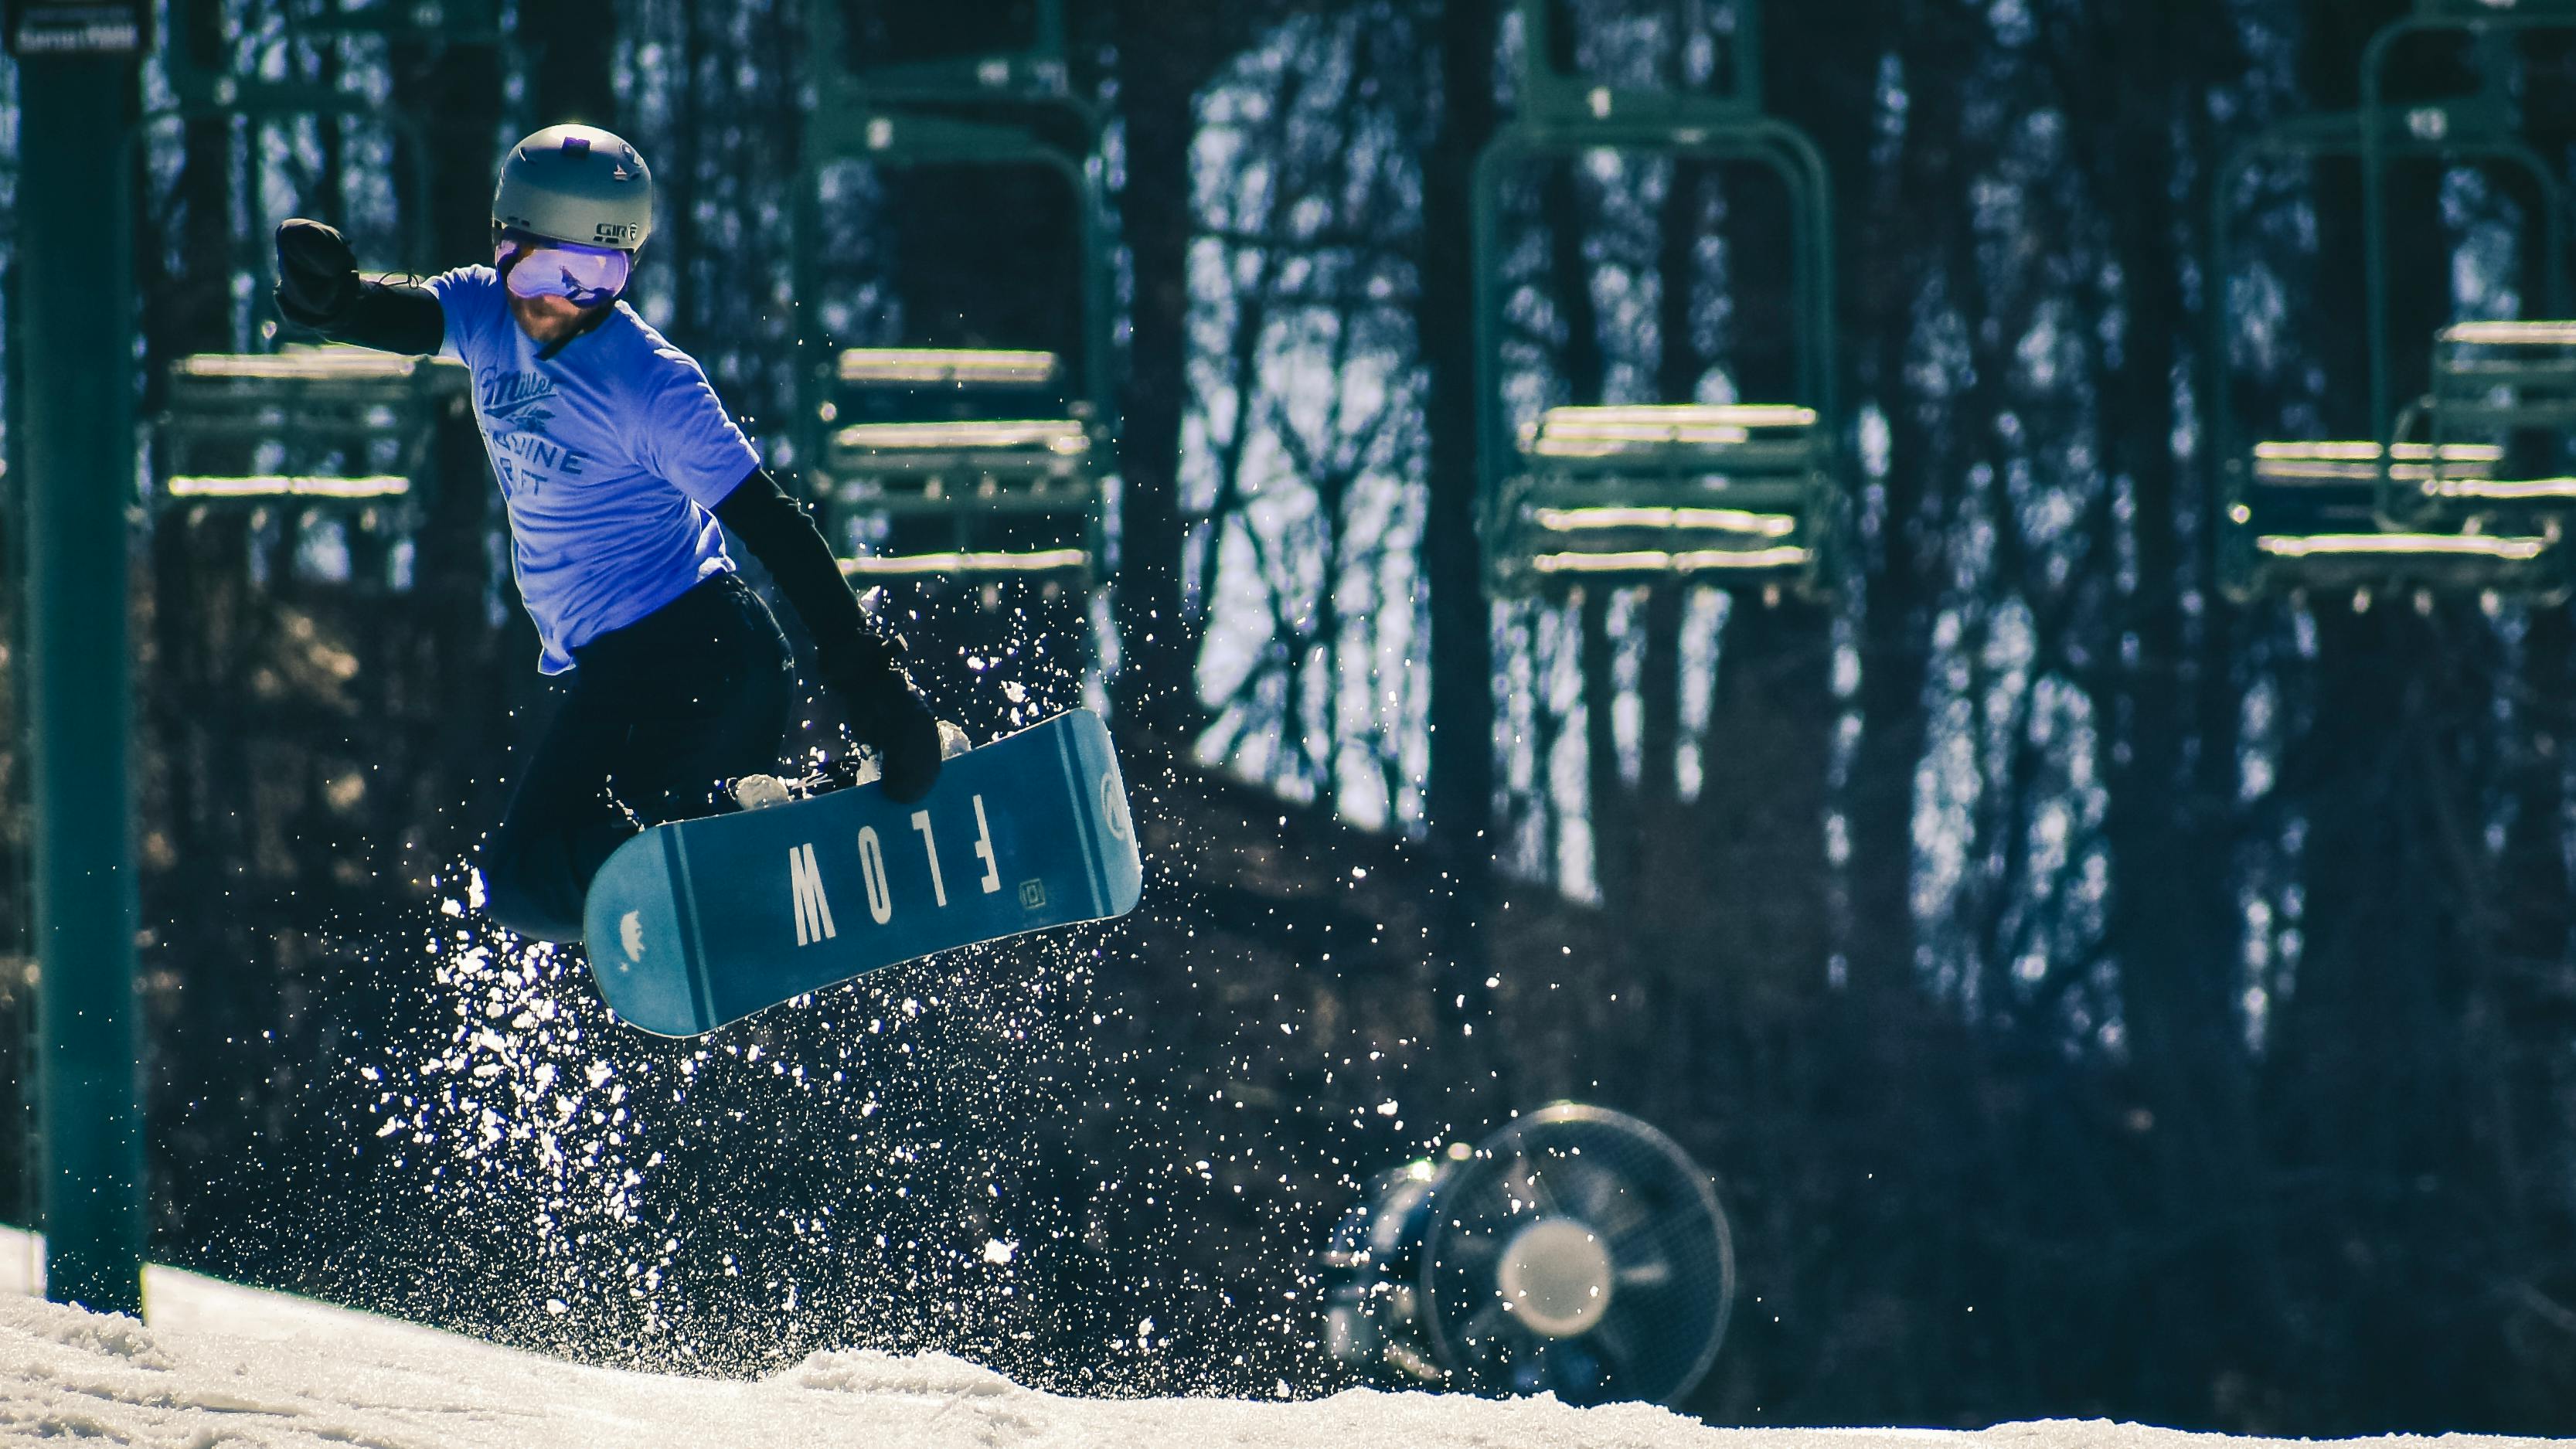 A man in a purple shirt executes a trick on a snowboard